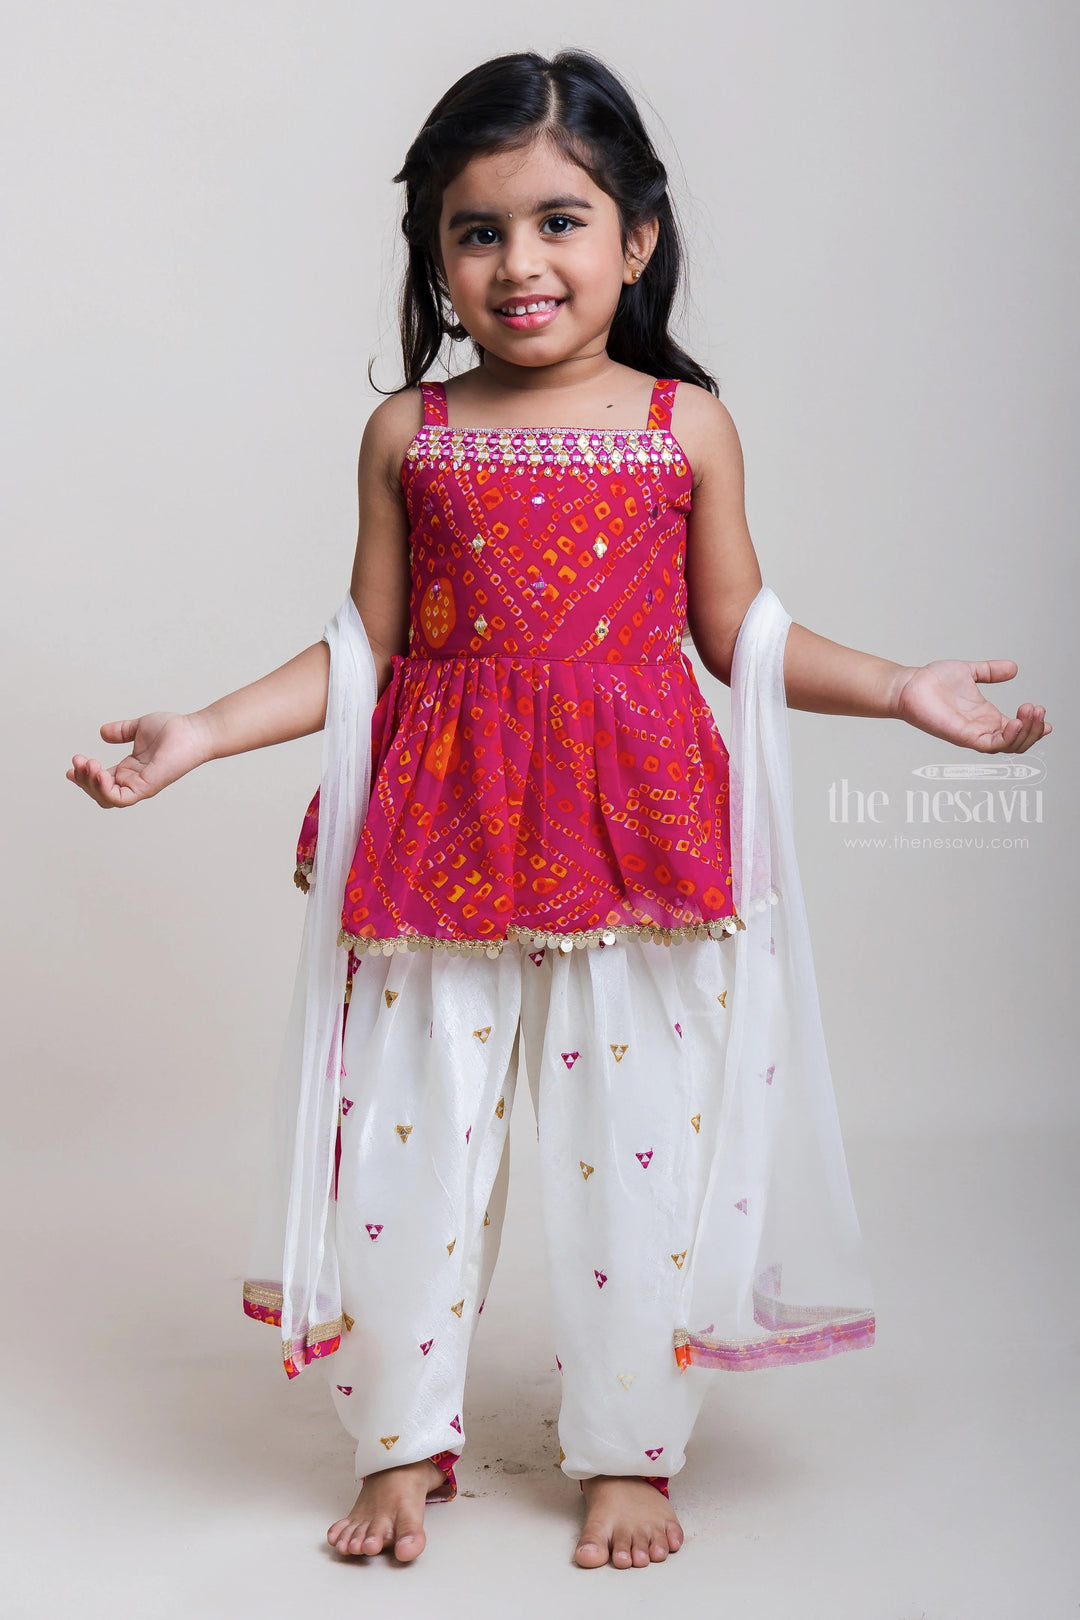 The Nesavu Girls Dothi Sets Red Short Tops With Mirror Embroidered Patiala Pants For Girls Nesavu 16 (1Y) / Pink GPS110B-16 Traditional Short Tops And Patiala Pants| New Collection| The Nesavu